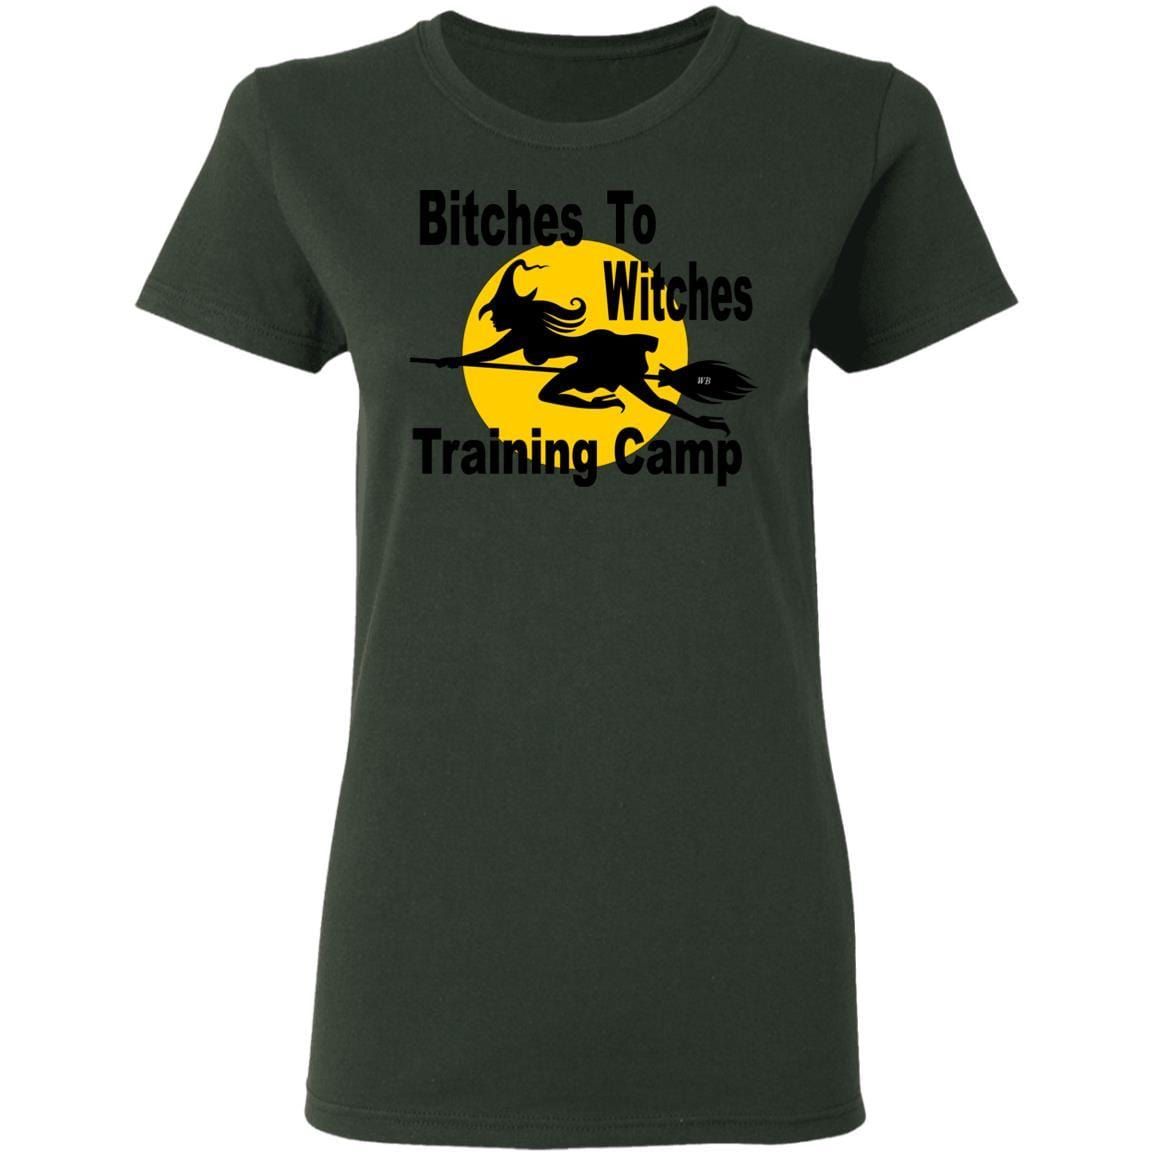 T-Shirts Forest Green / S WineyBitches.Co "Bitches To Witches Training Camp" Halloween Ladies' 5.3 oz. T-Shirt WineyBitchesCo